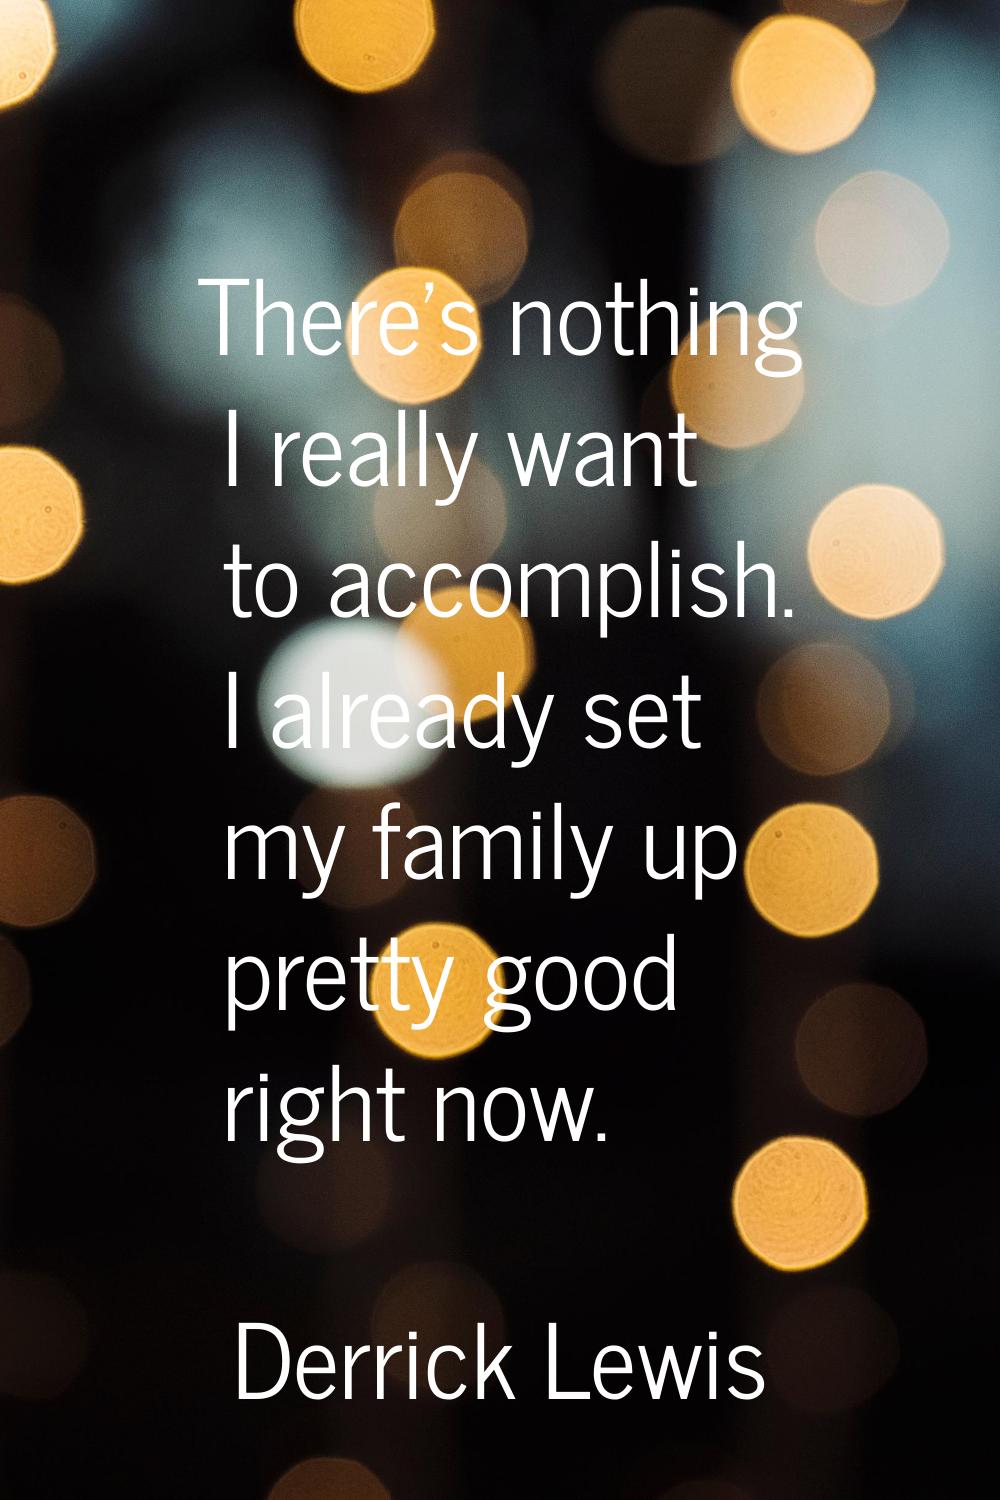 There's nothing I really want to accomplish. I already set my family up pretty good right now.